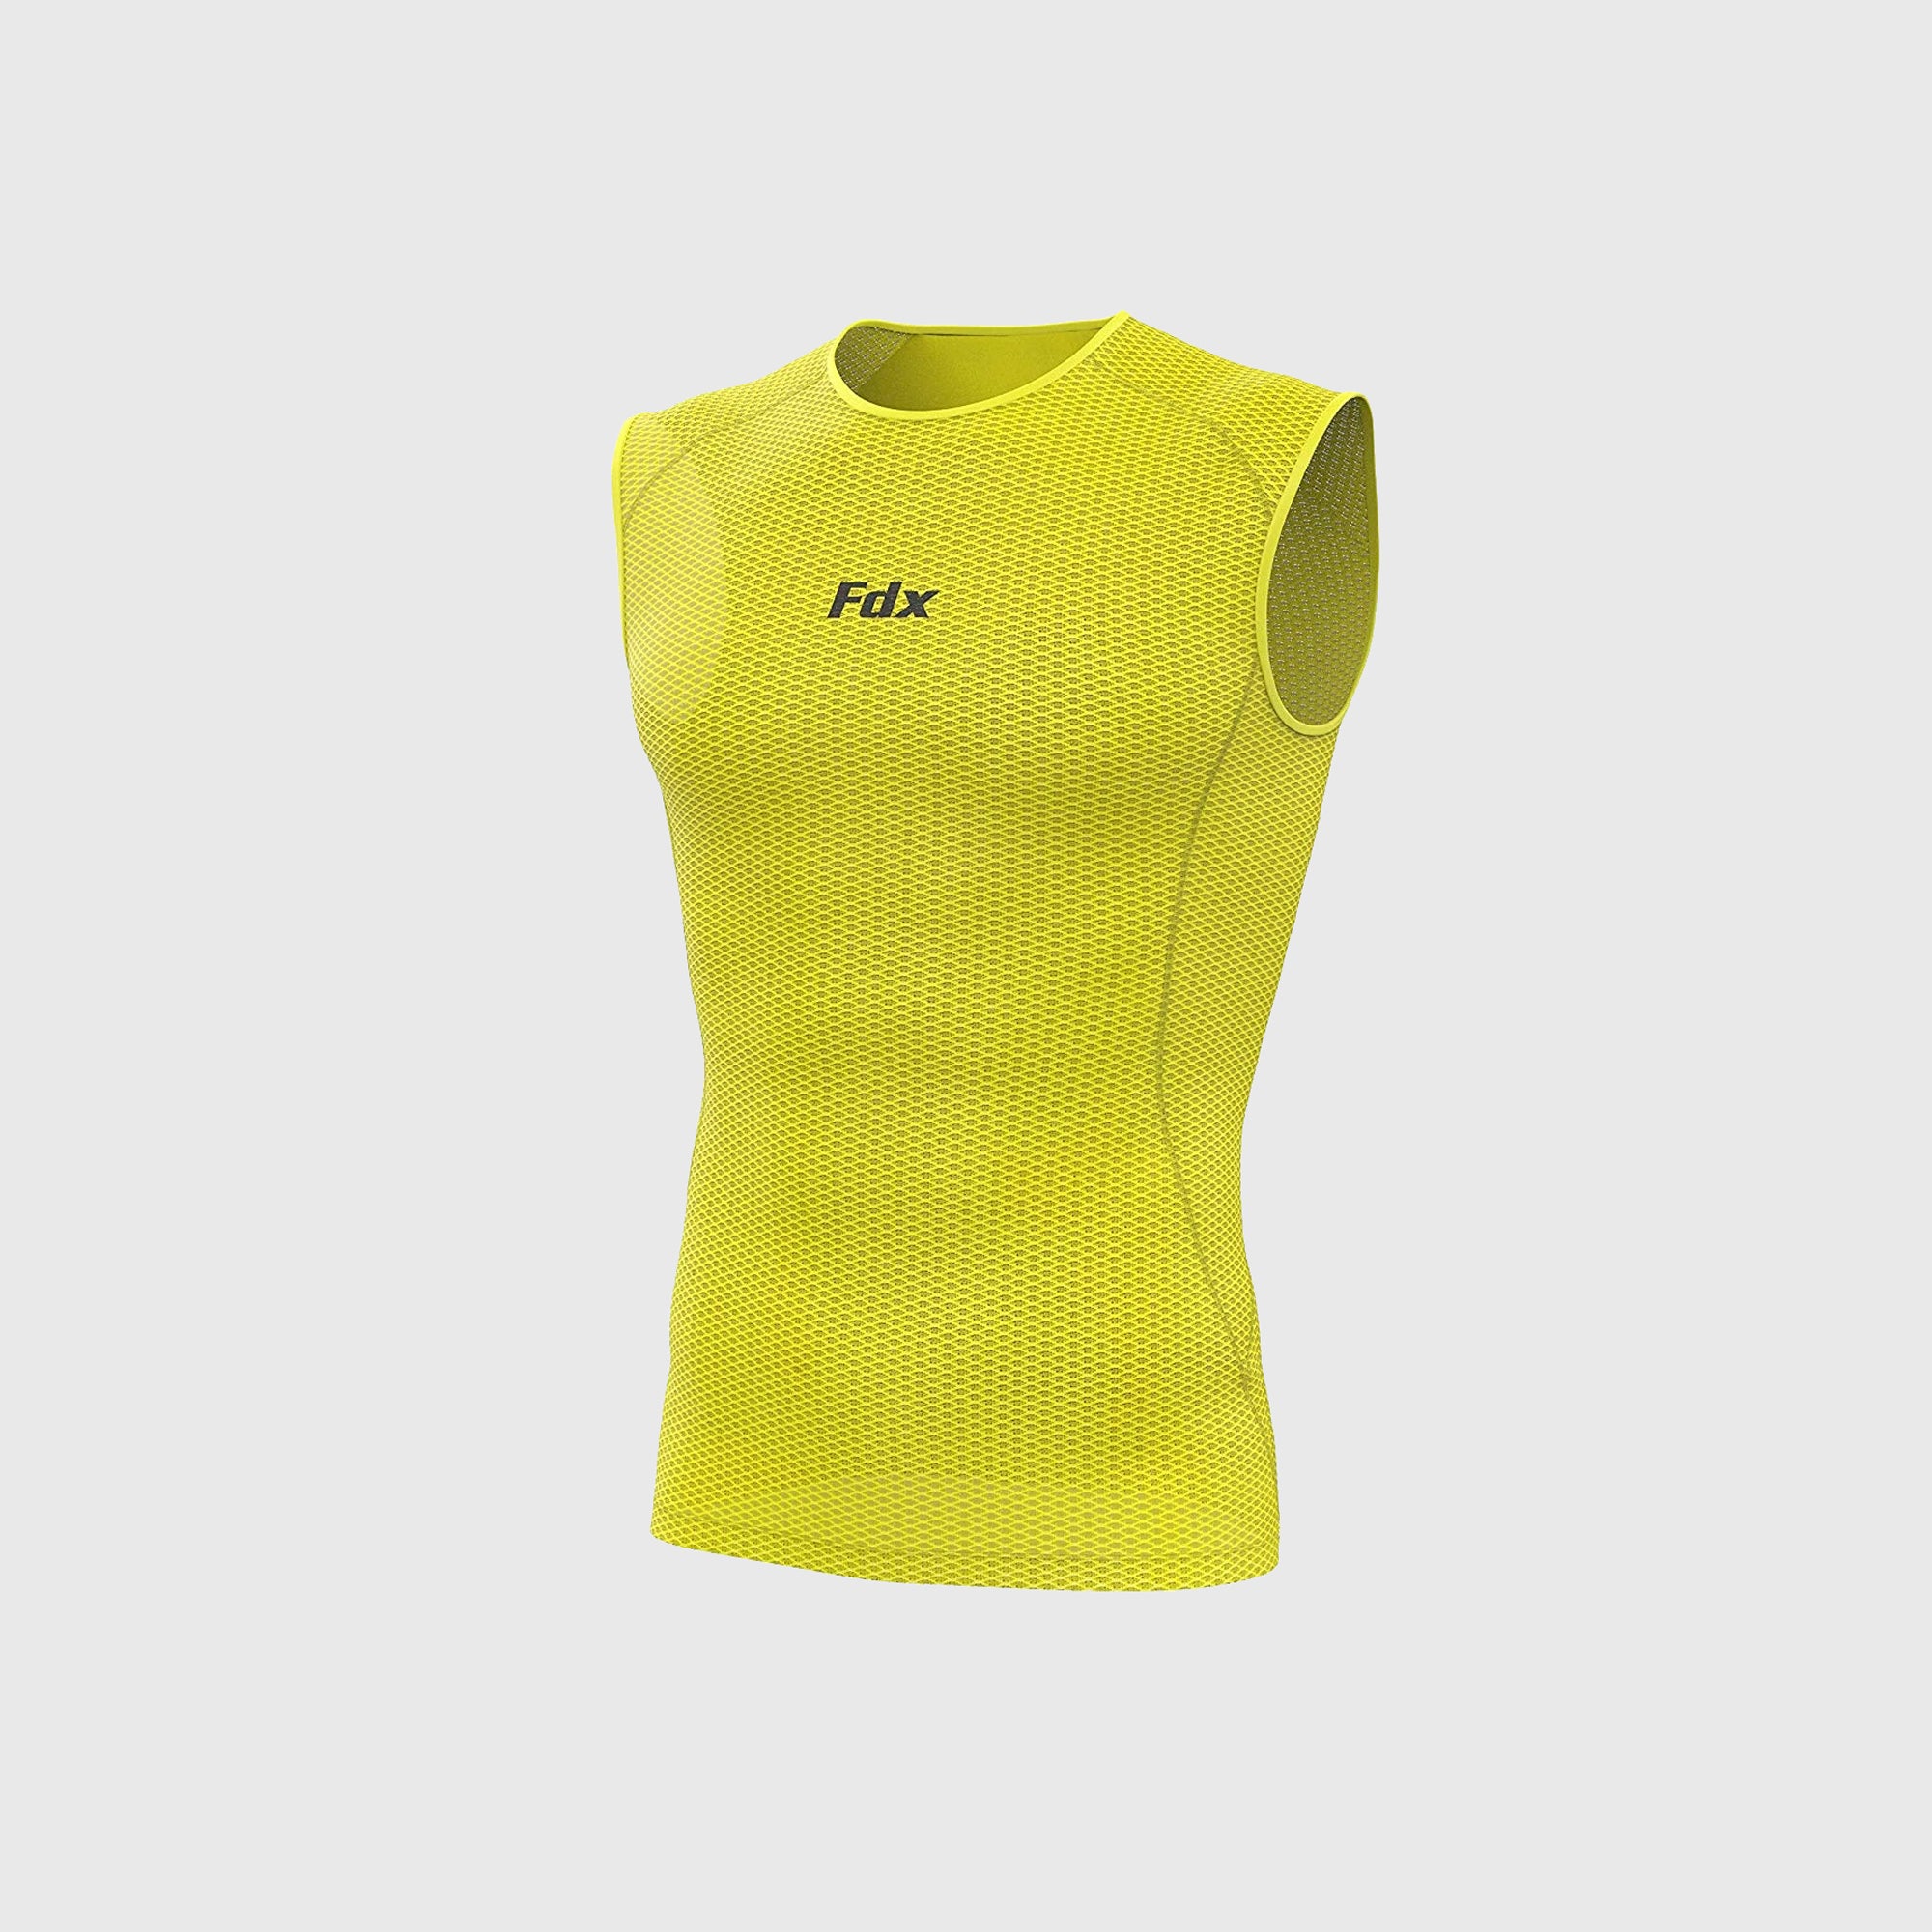 Fdx Mens Yellow Sleeveless Mesh Compression Top Running Gym Workout Wear Rash Guard Stretchable Breathable - Aeroform